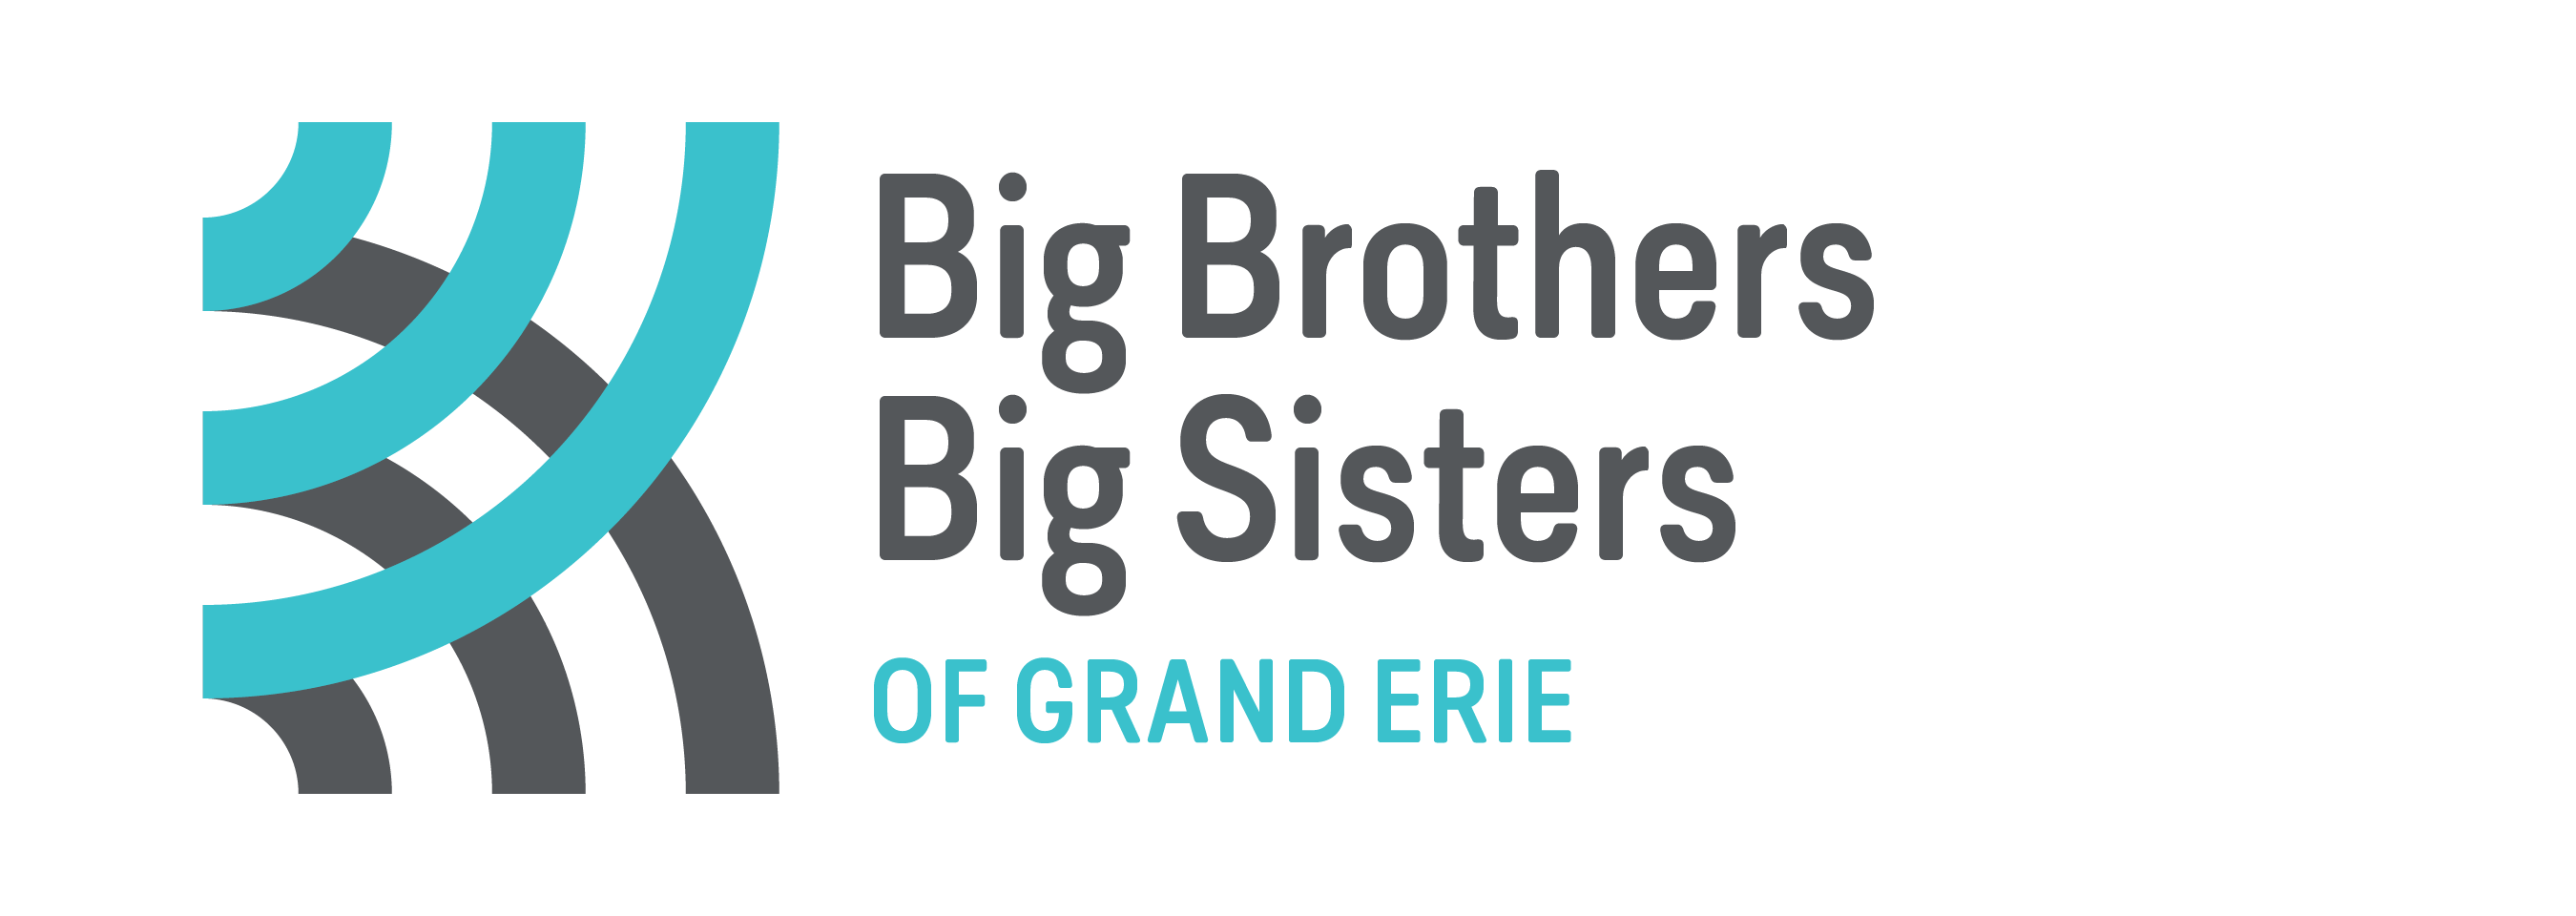 Showcase Image for Big Brothers Big Sisters of Grand Erie